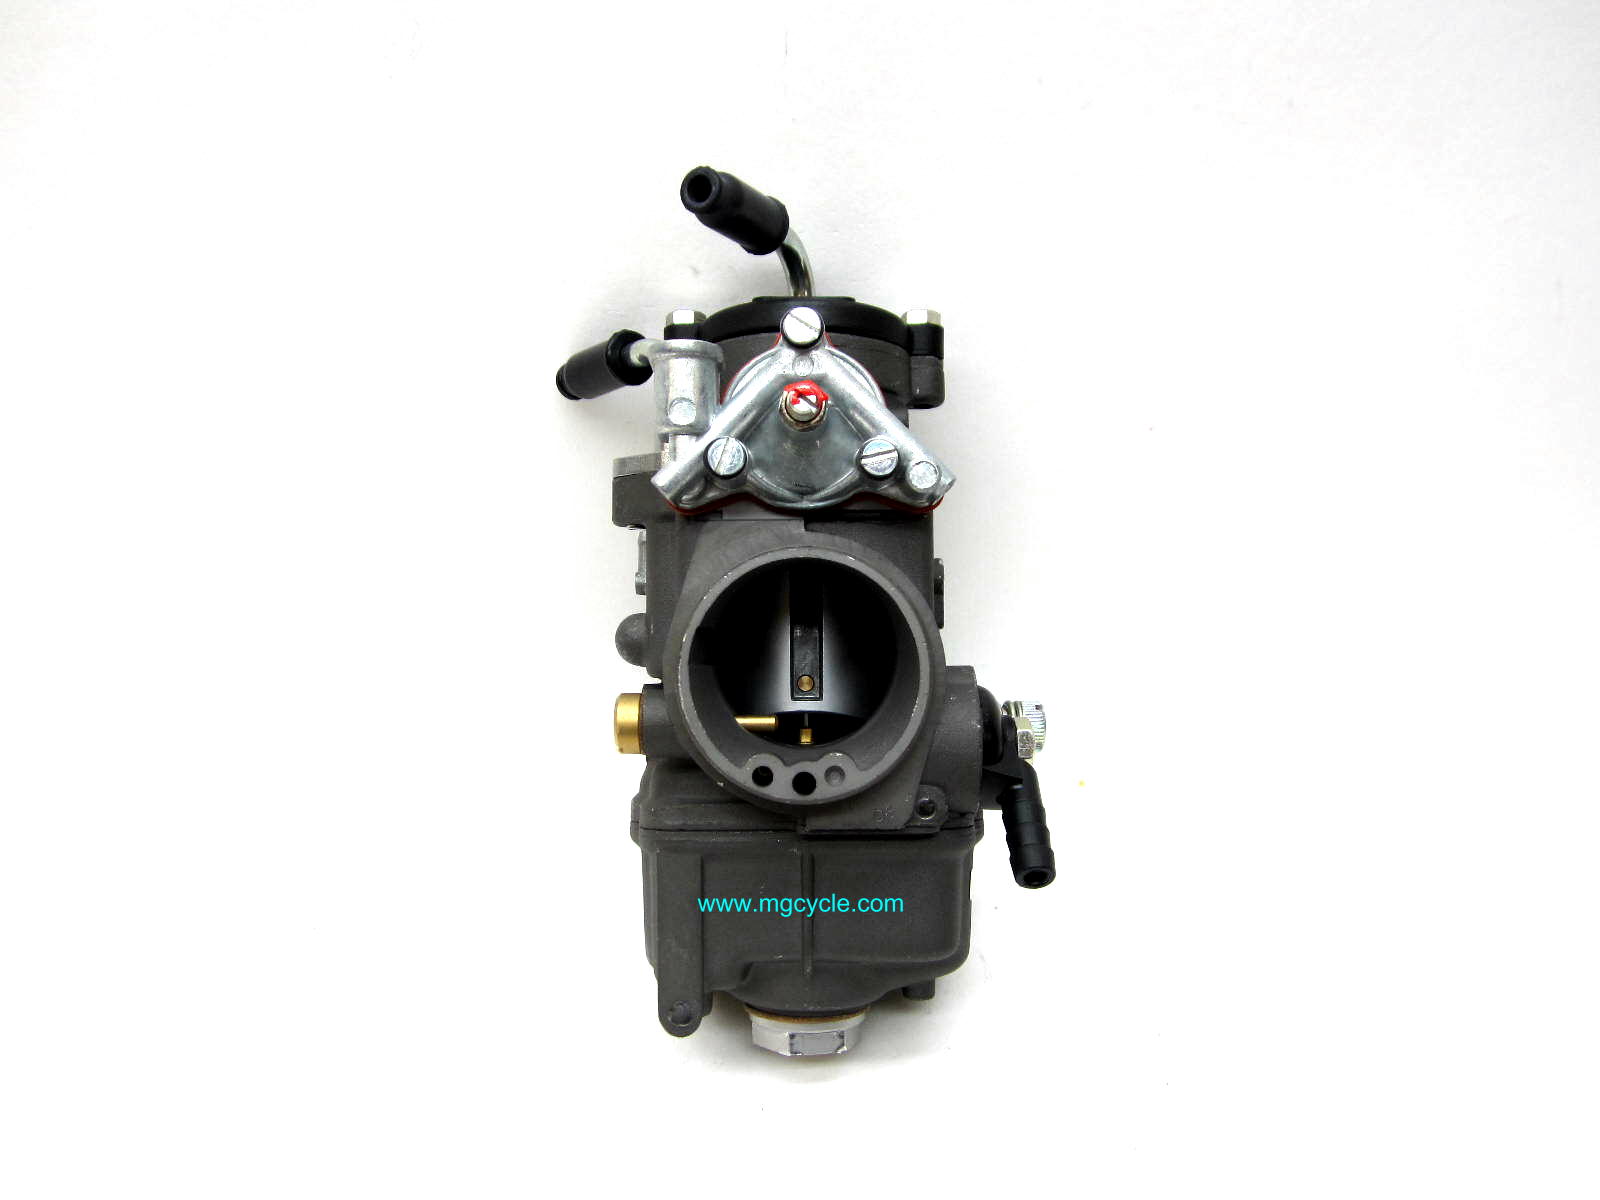 Dellorto PHF36 carburator as on SP3, right side